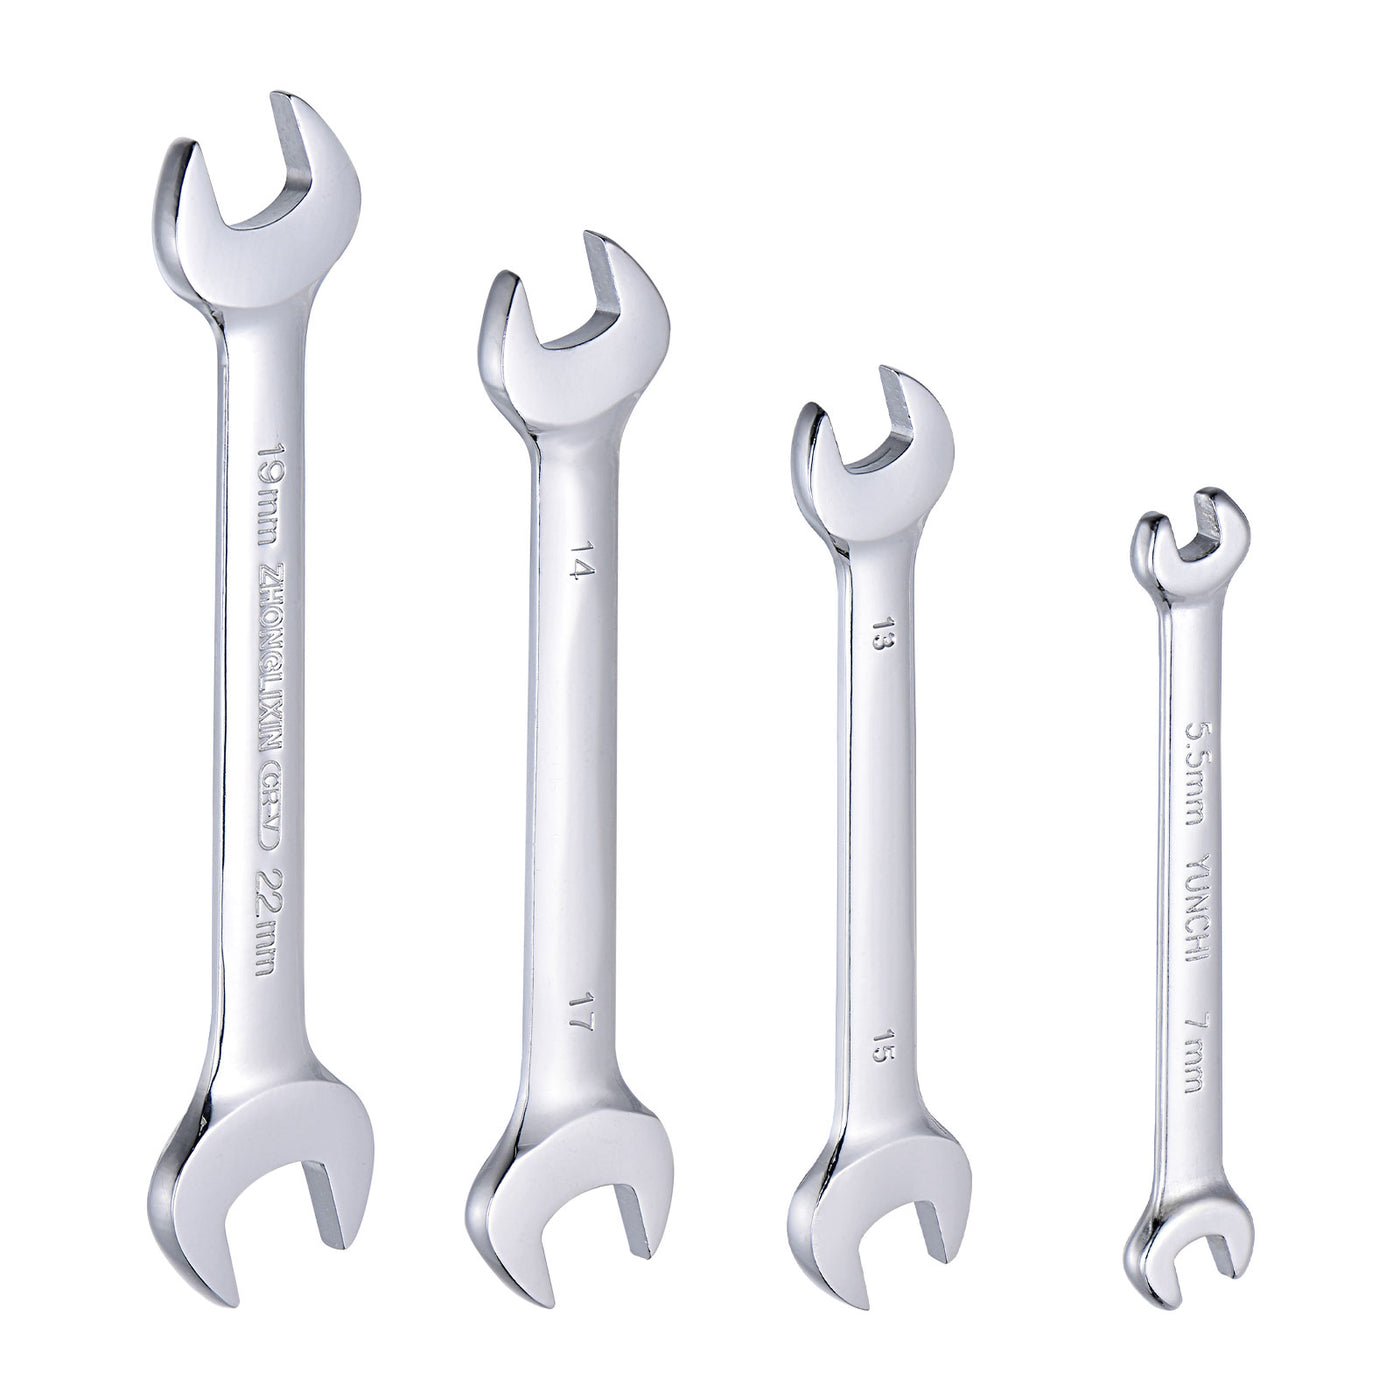 uxcell Uxcell Double Open-End Wrench Set, 5.5-22mm Metric CR-V with Rolling Pouch, 4-Piece